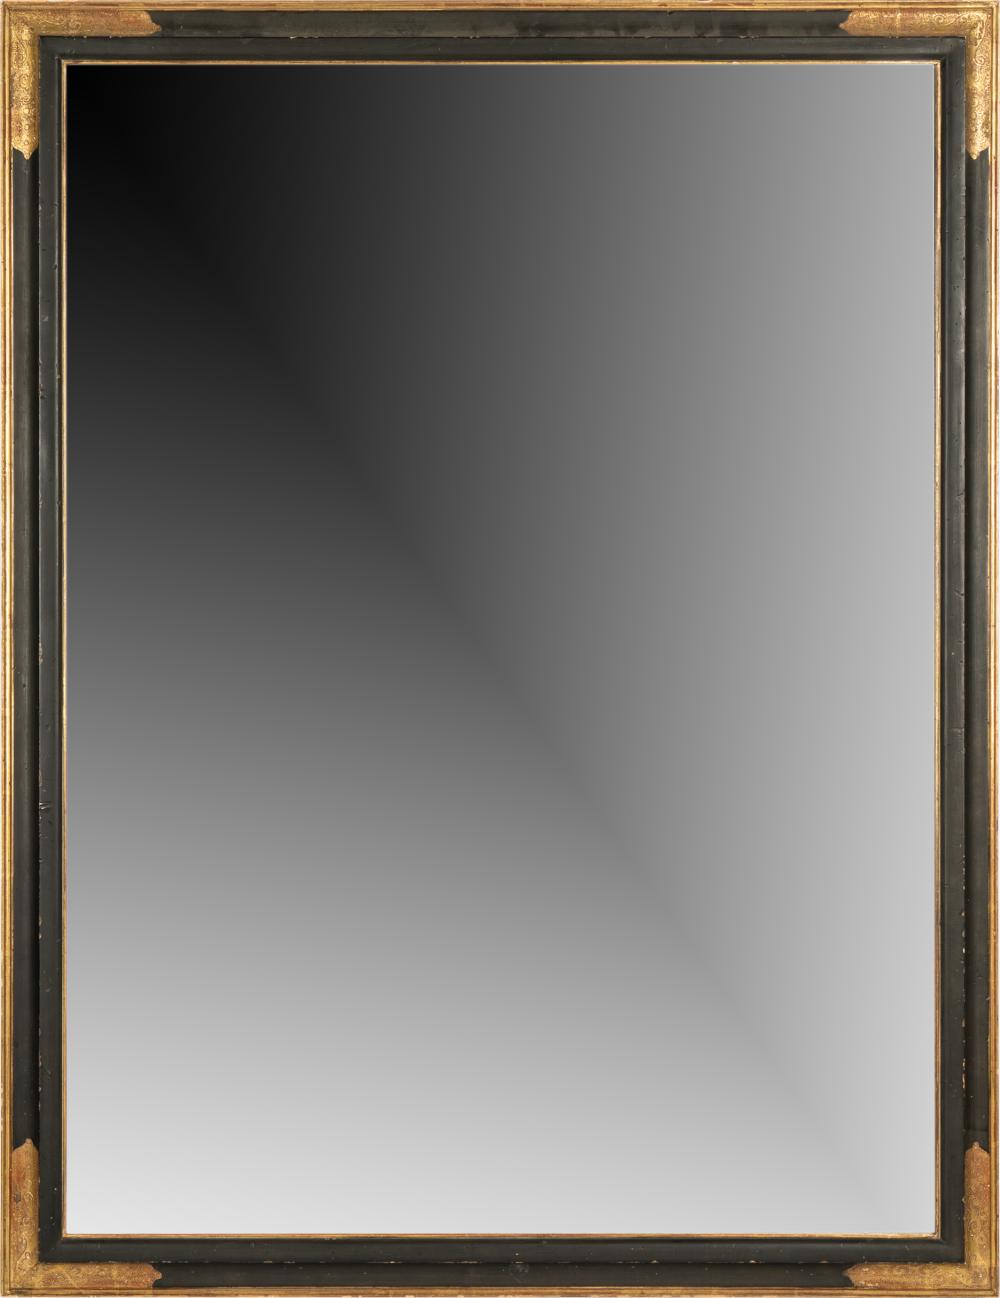 BLACK AND GILT-PAINTED WALL MIRRORBlack